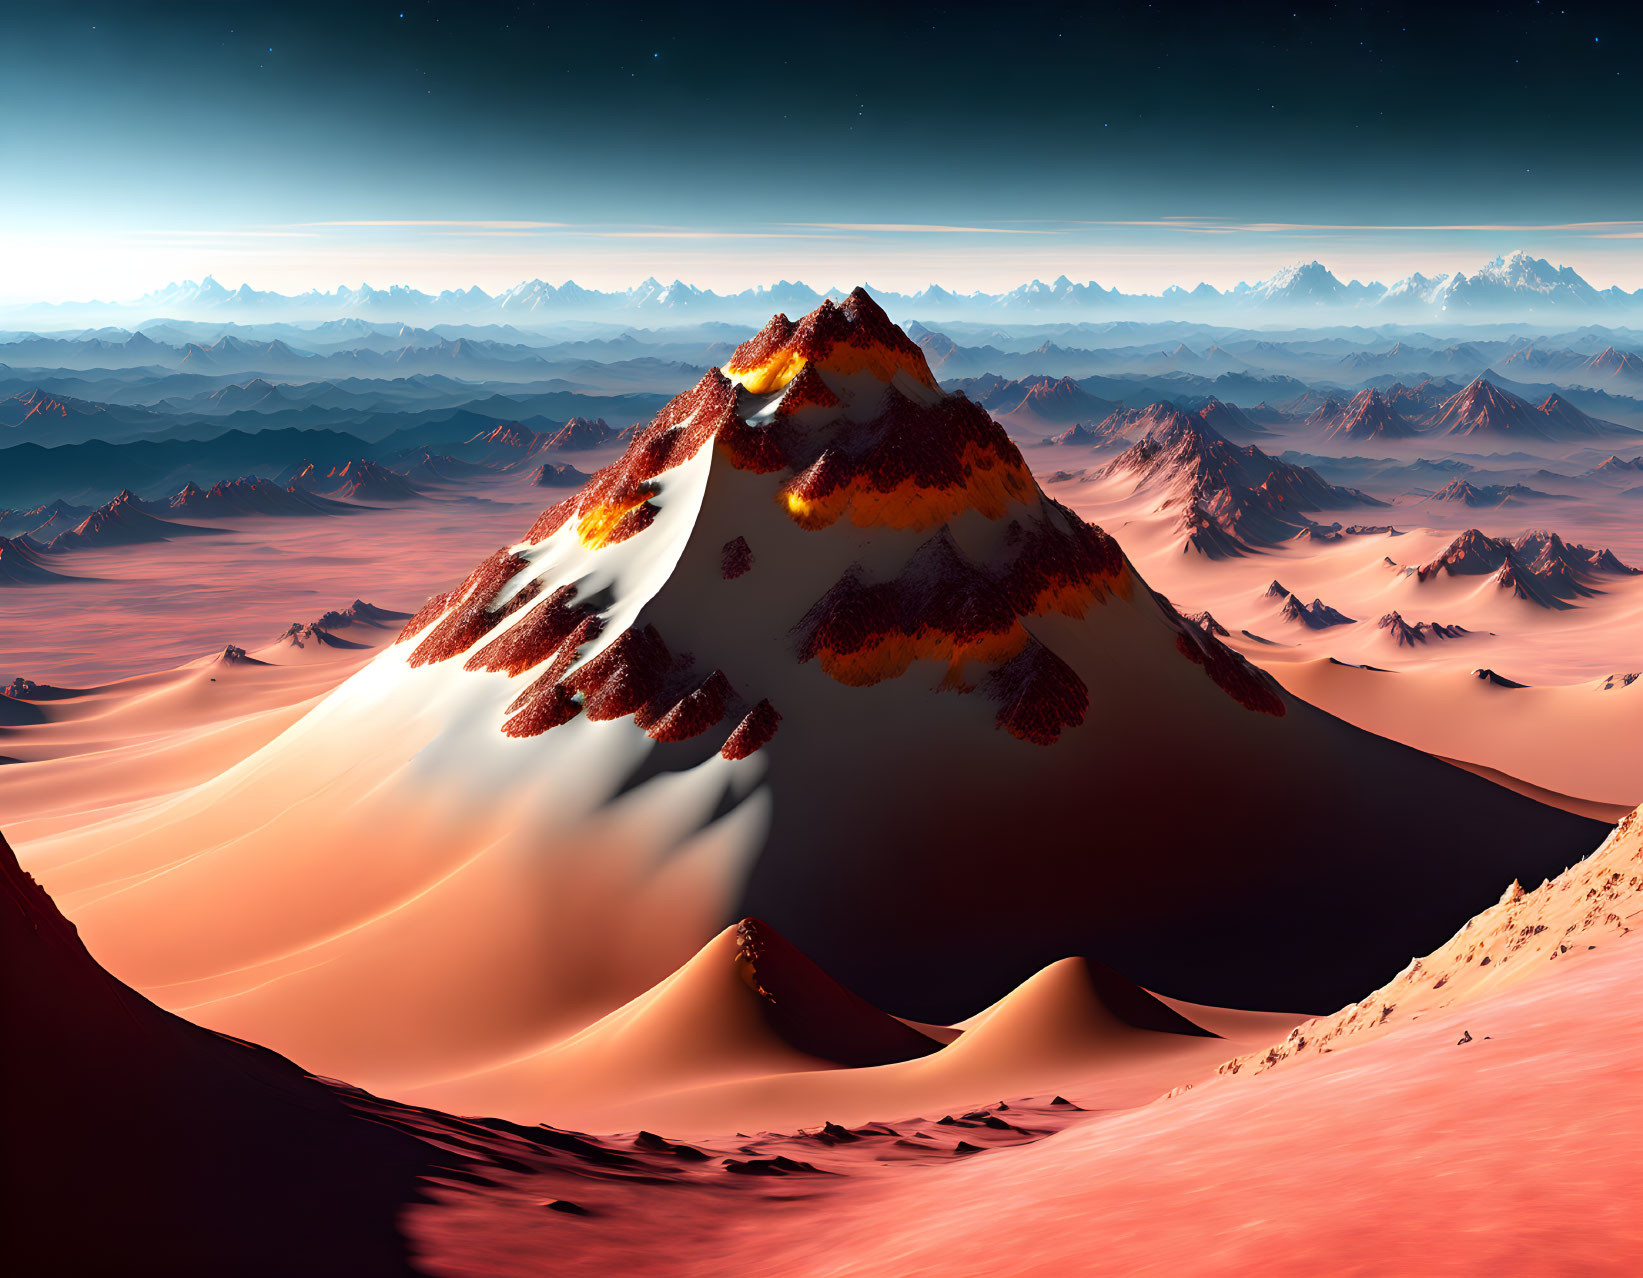 Snow-capped mountain towering over red desert at twilight